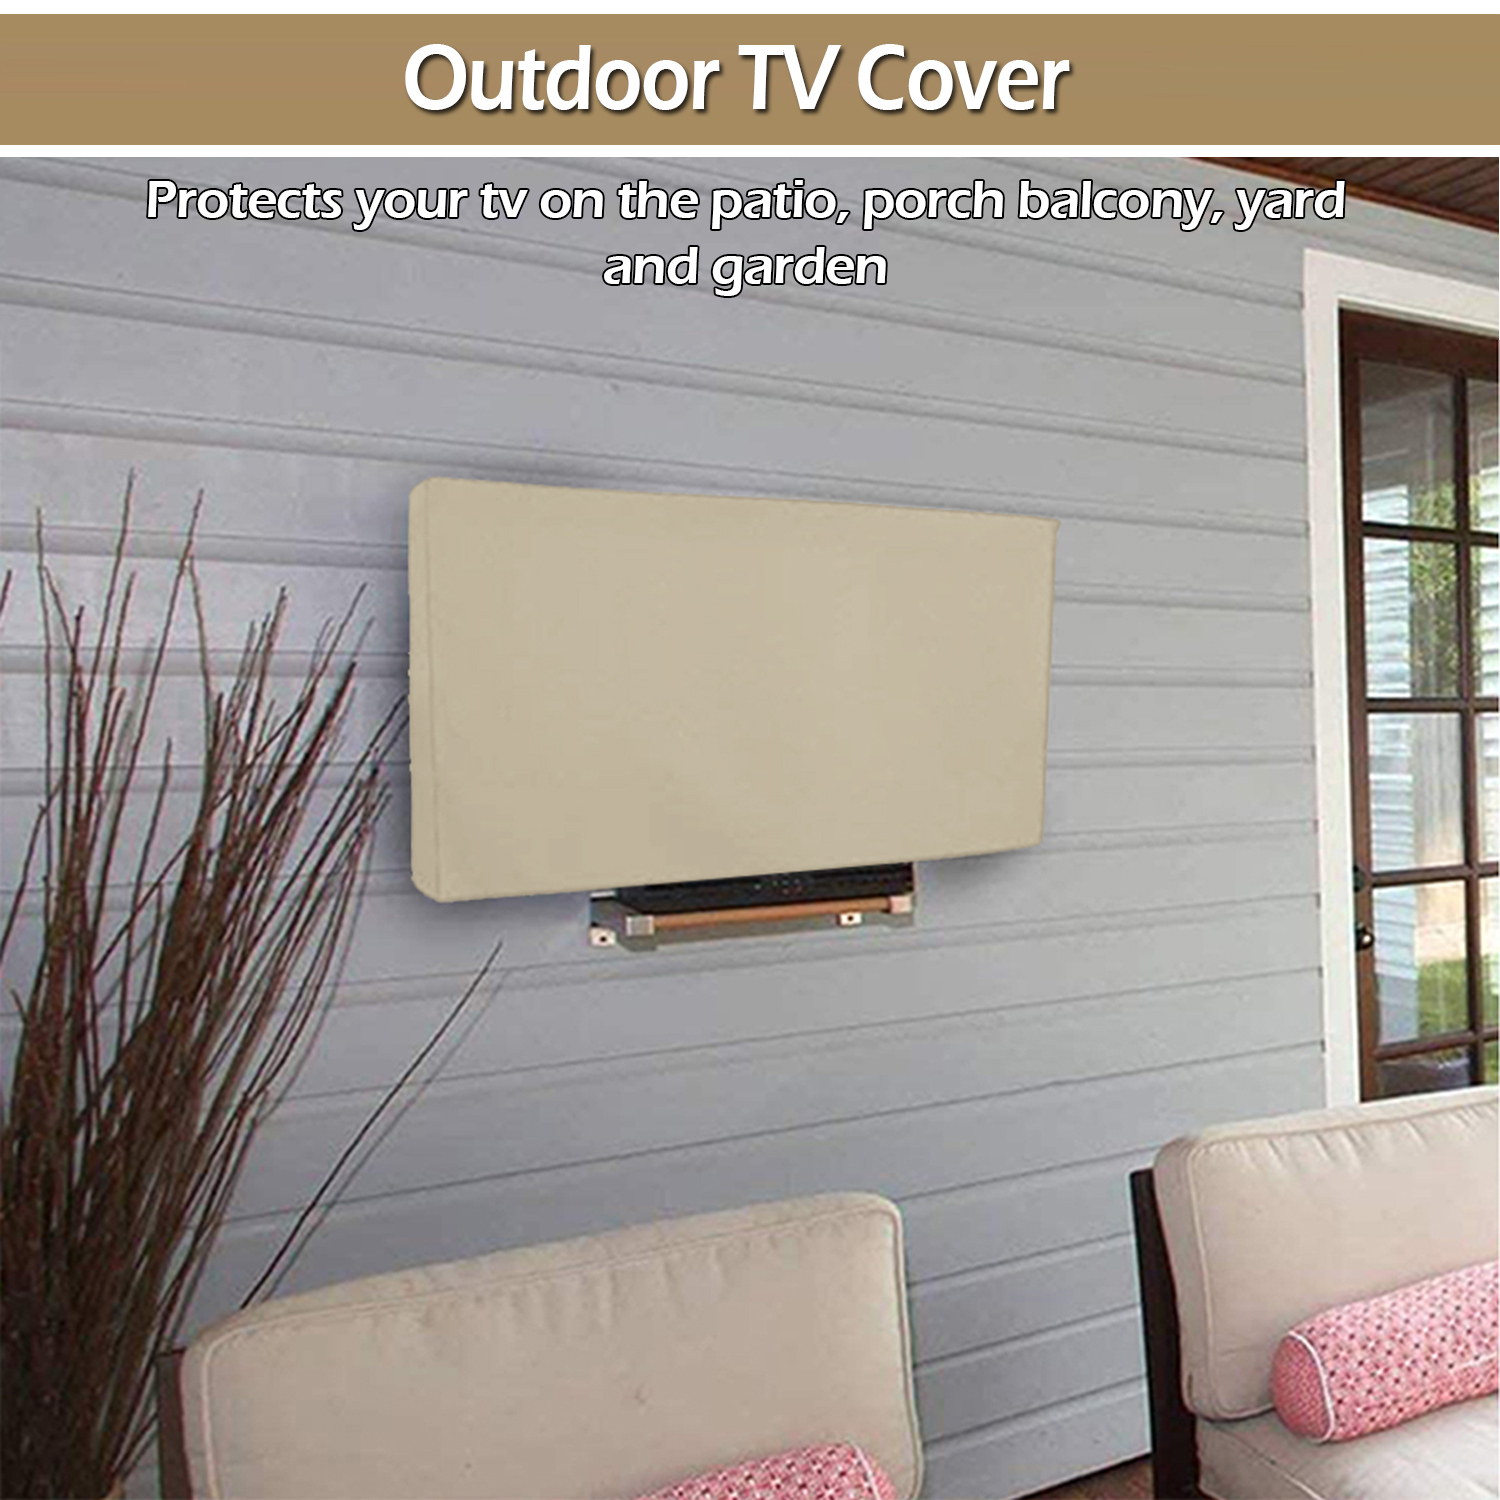 IC ICLOVER 60"-65" Outdoor Weatherproof LCD Plasma TV/Television Cover Flat Screen TV/Television Dustproof Protector with Waterproof Remote Pocket, Beige - image 2 of 9